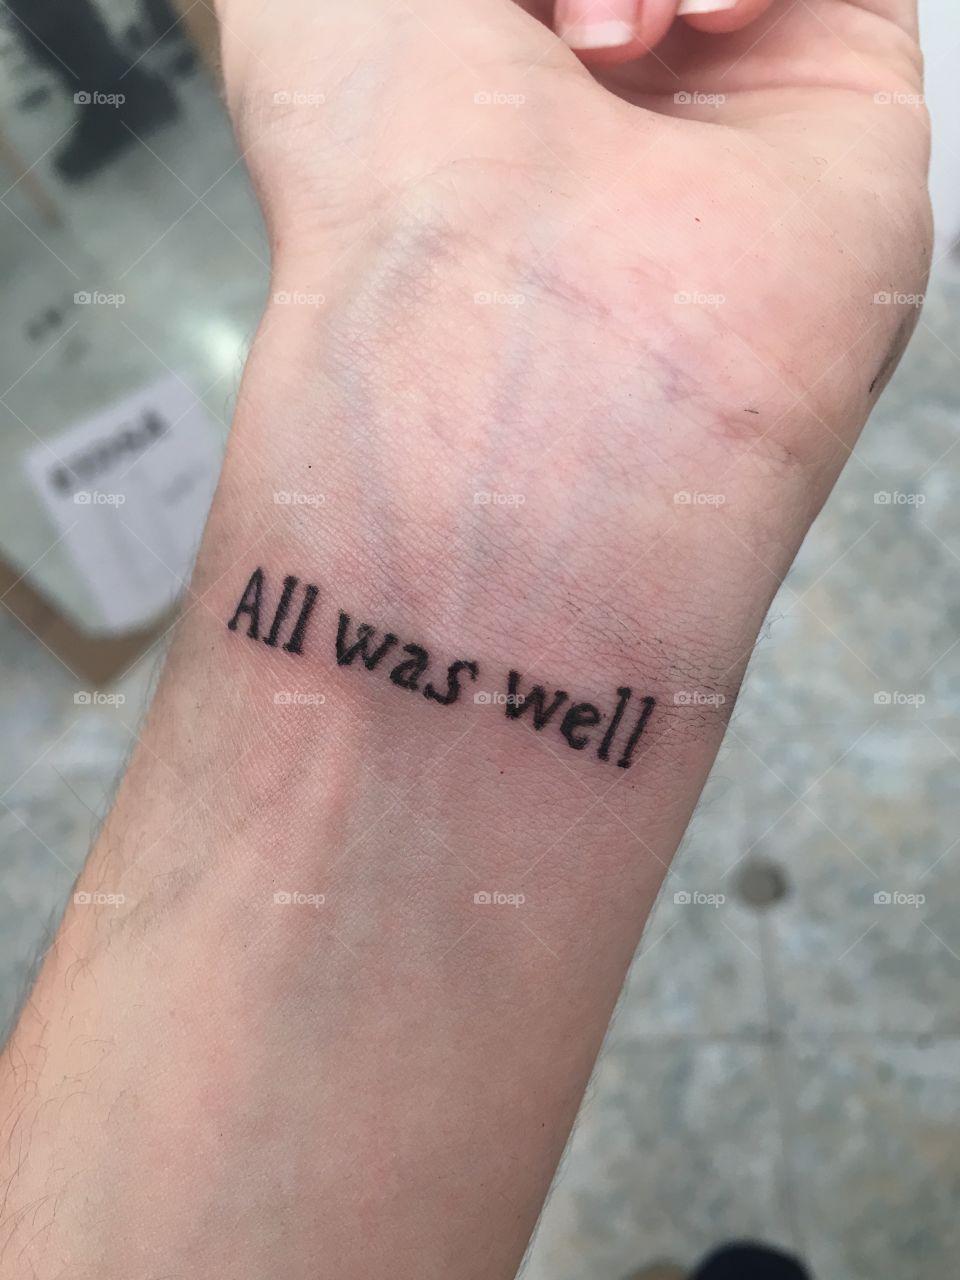 Harry potter tattoo. All was well. 